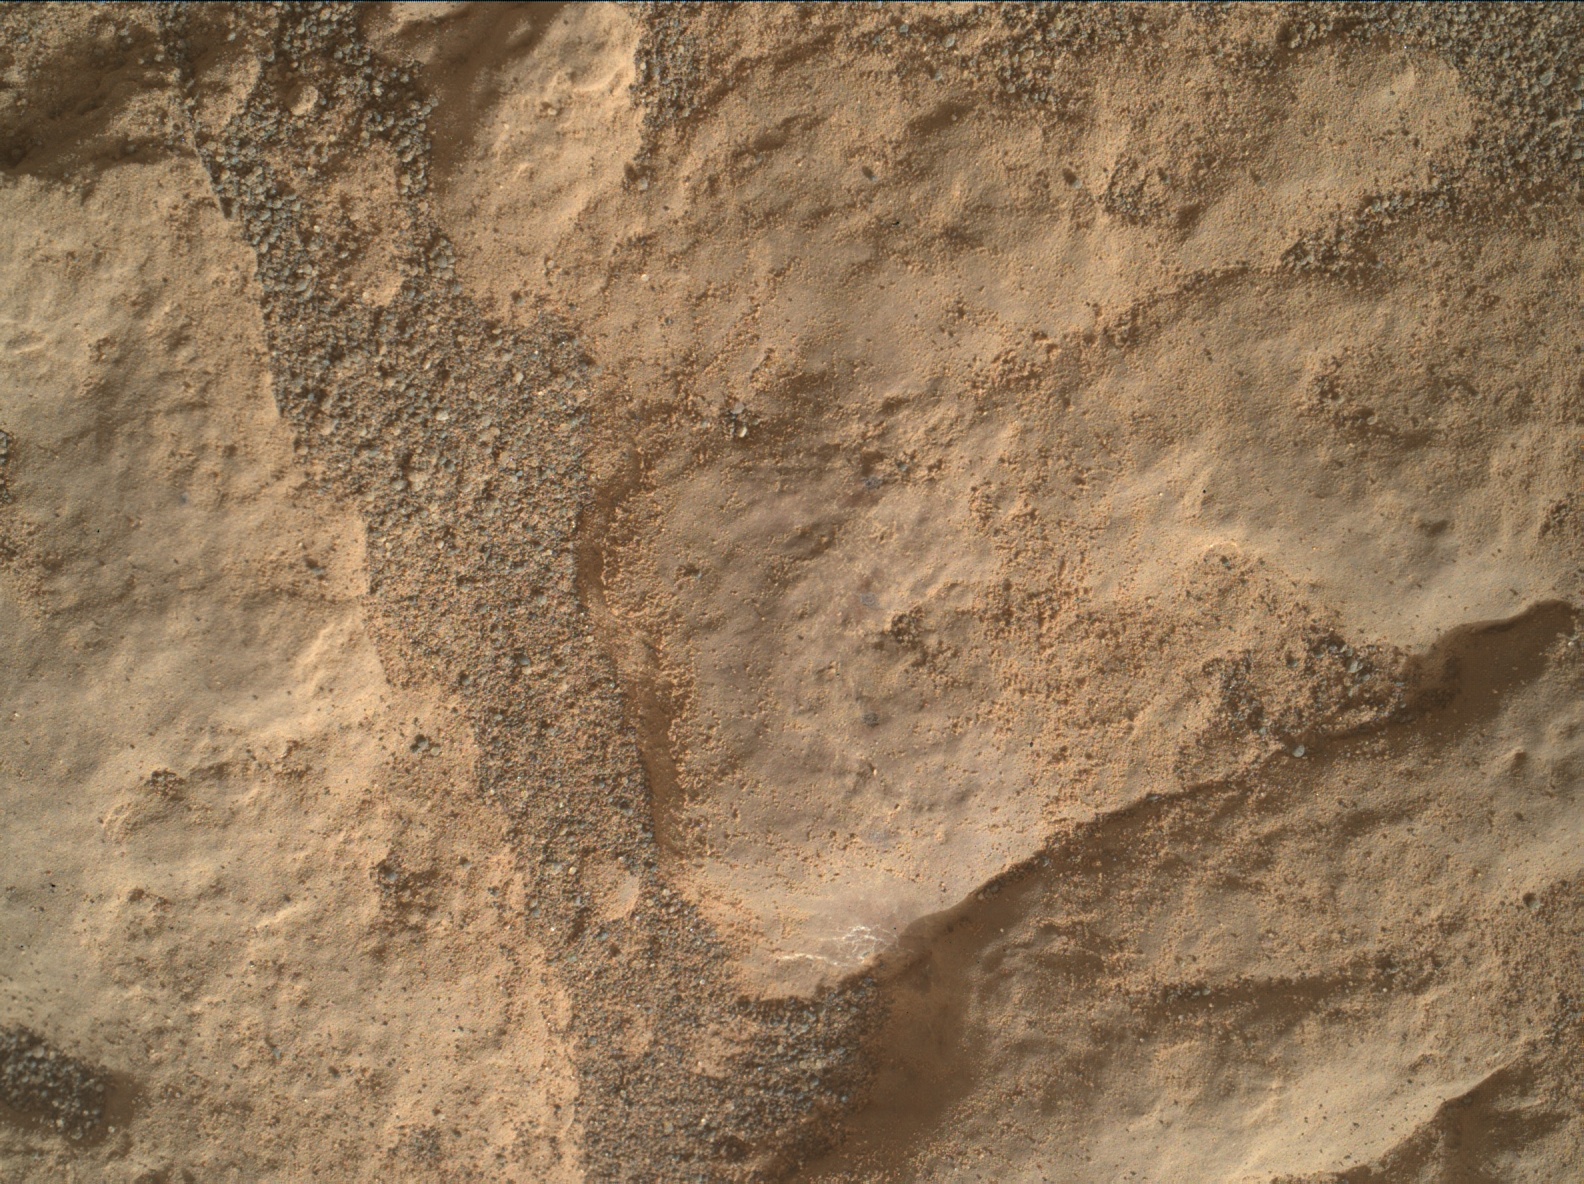 Nasa's Mars rover Curiosity acquired this image using its Mars Hand Lens Imager (MAHLI) on Sol 2474